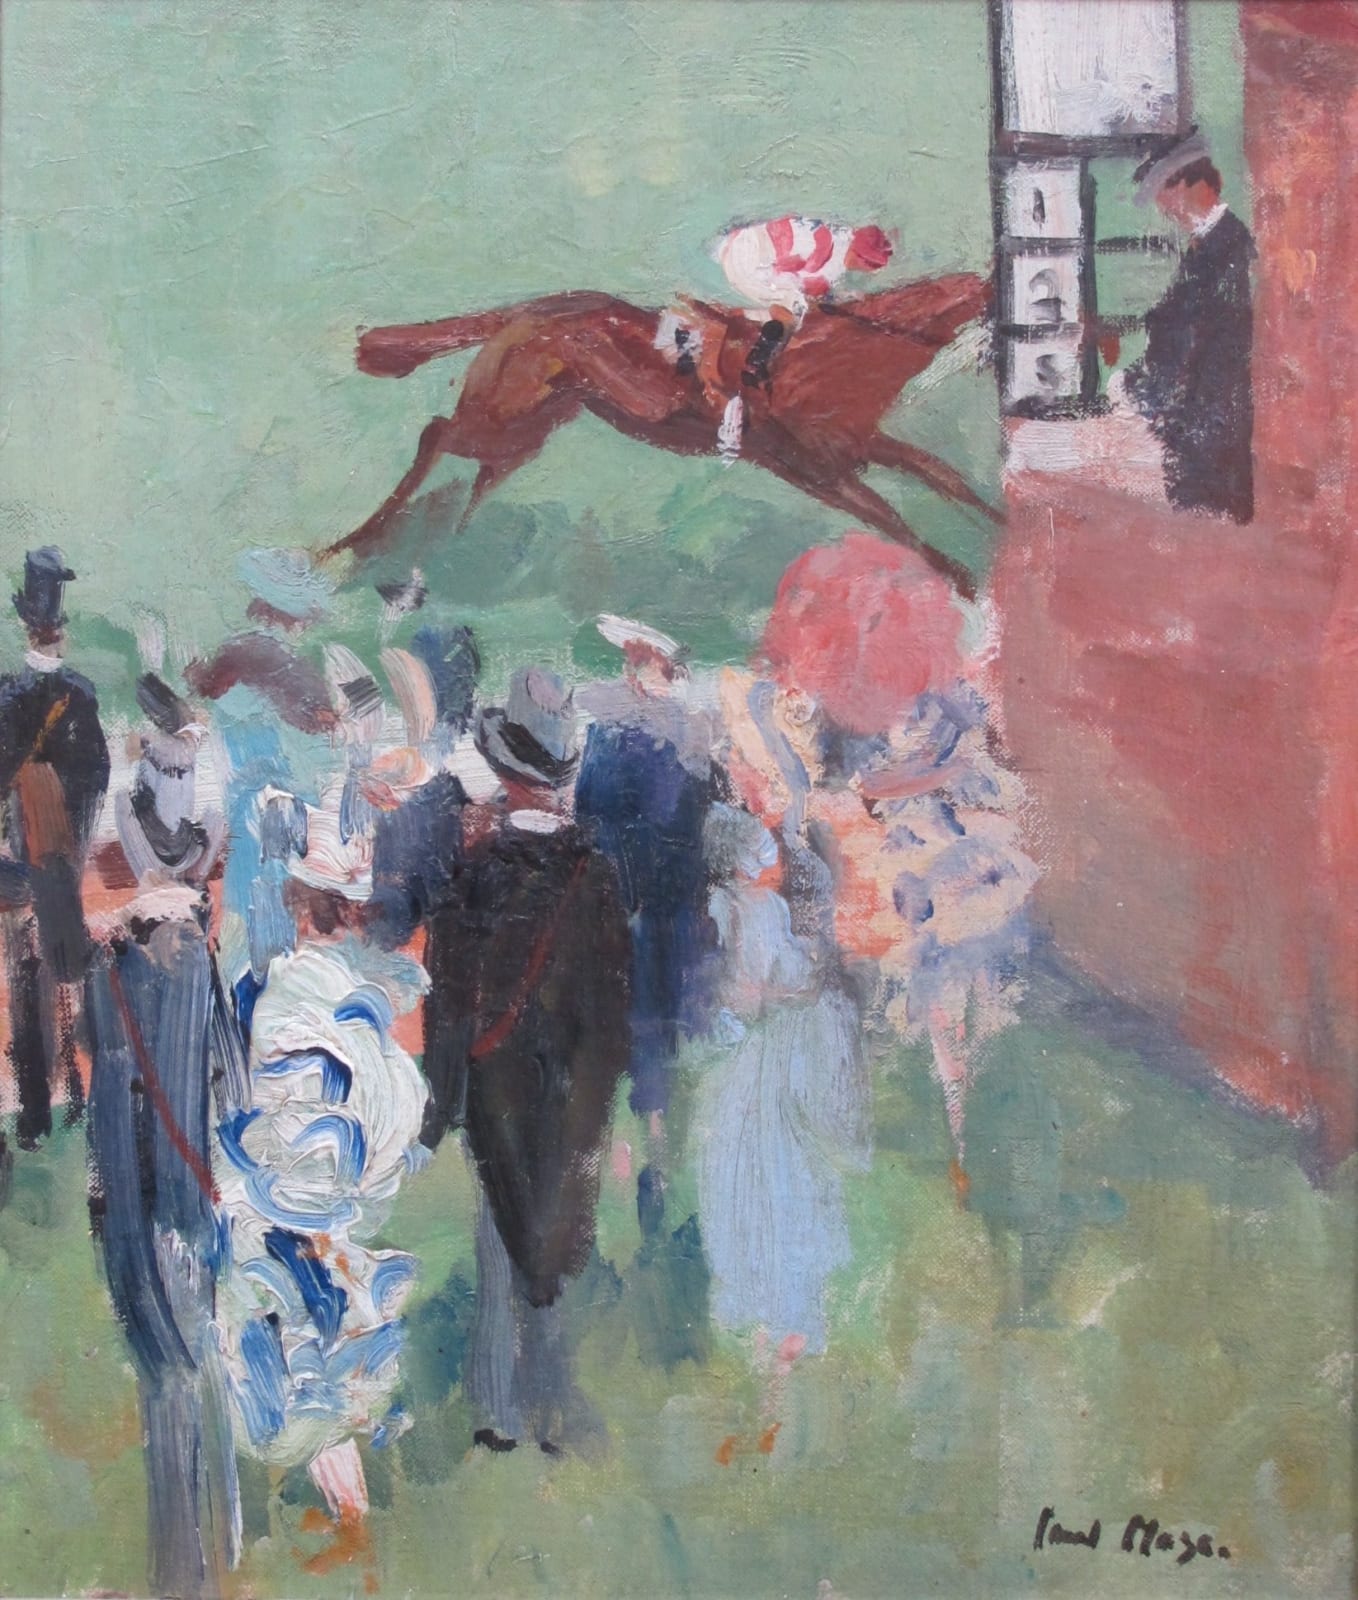 PAUL MAZE, At the Races